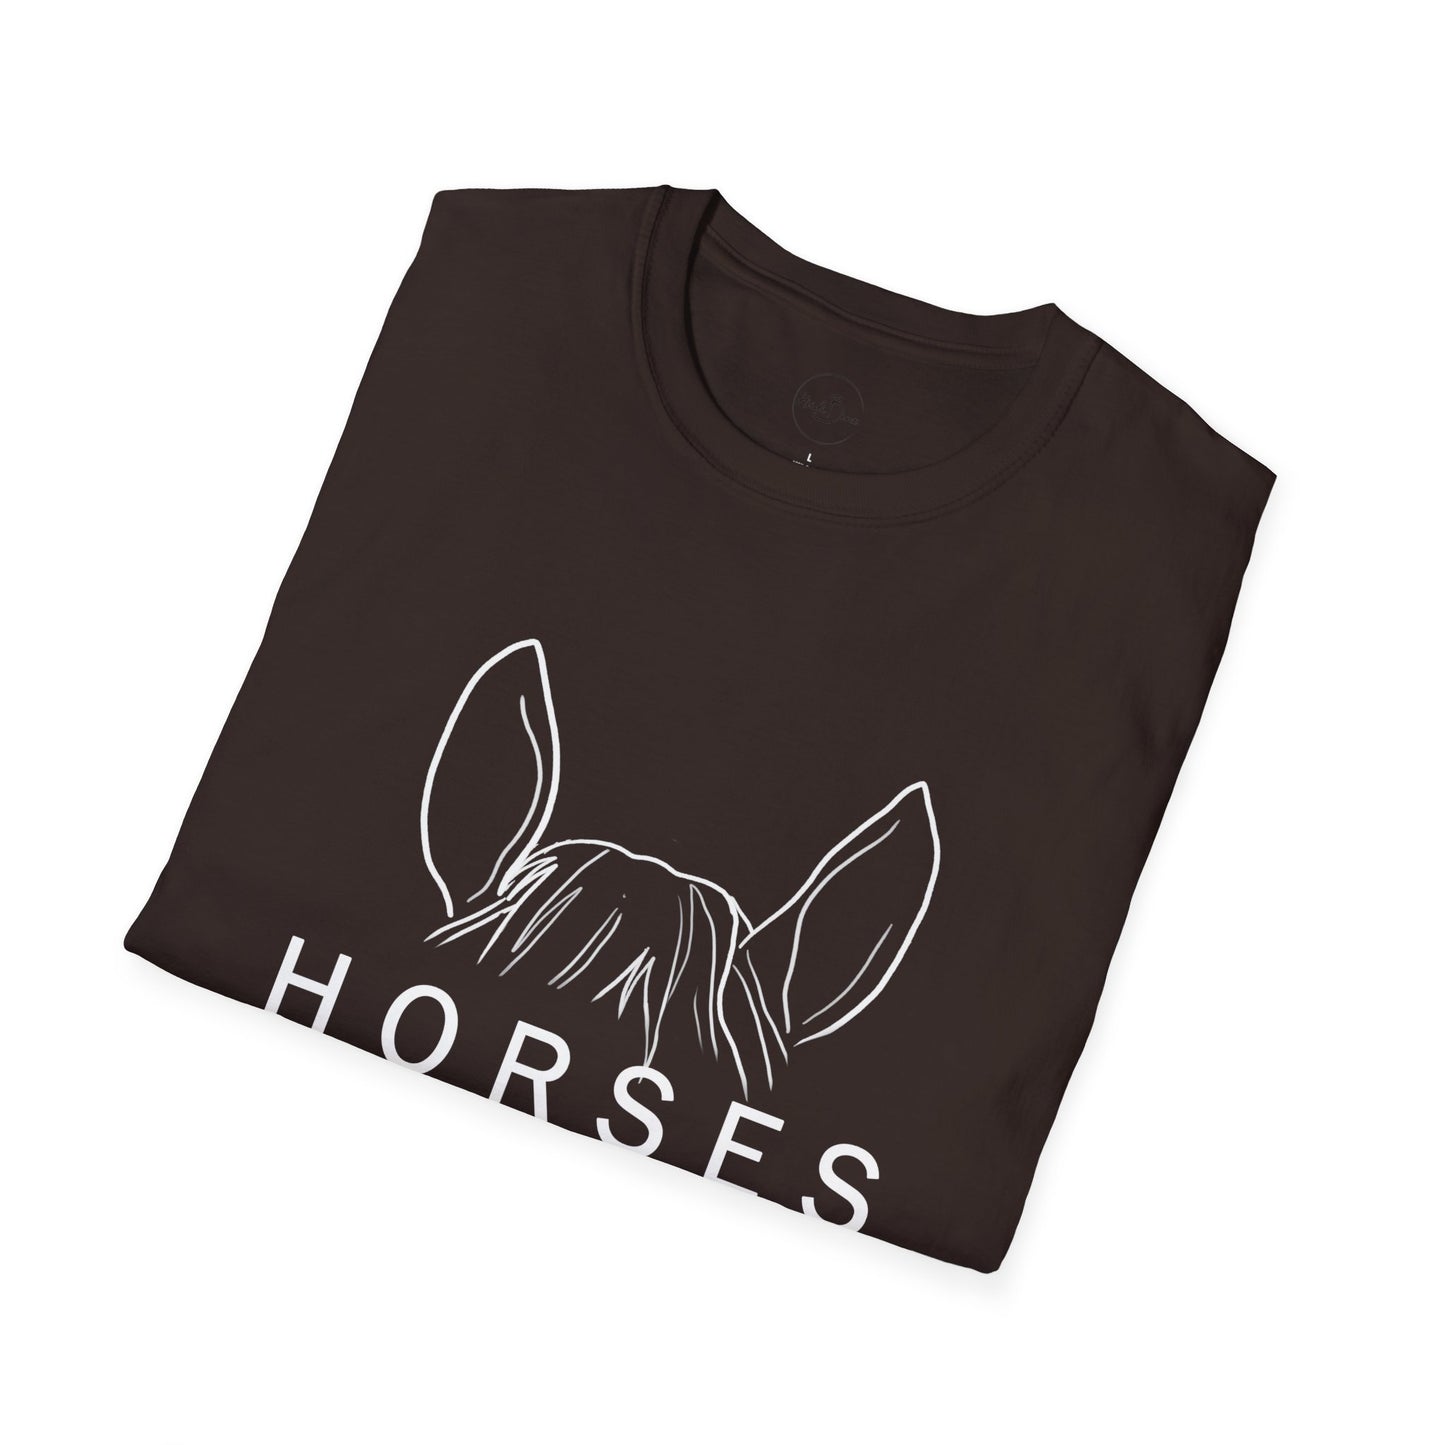 H O R S E - Definition - Funny T-Shirt for Horse Lovers